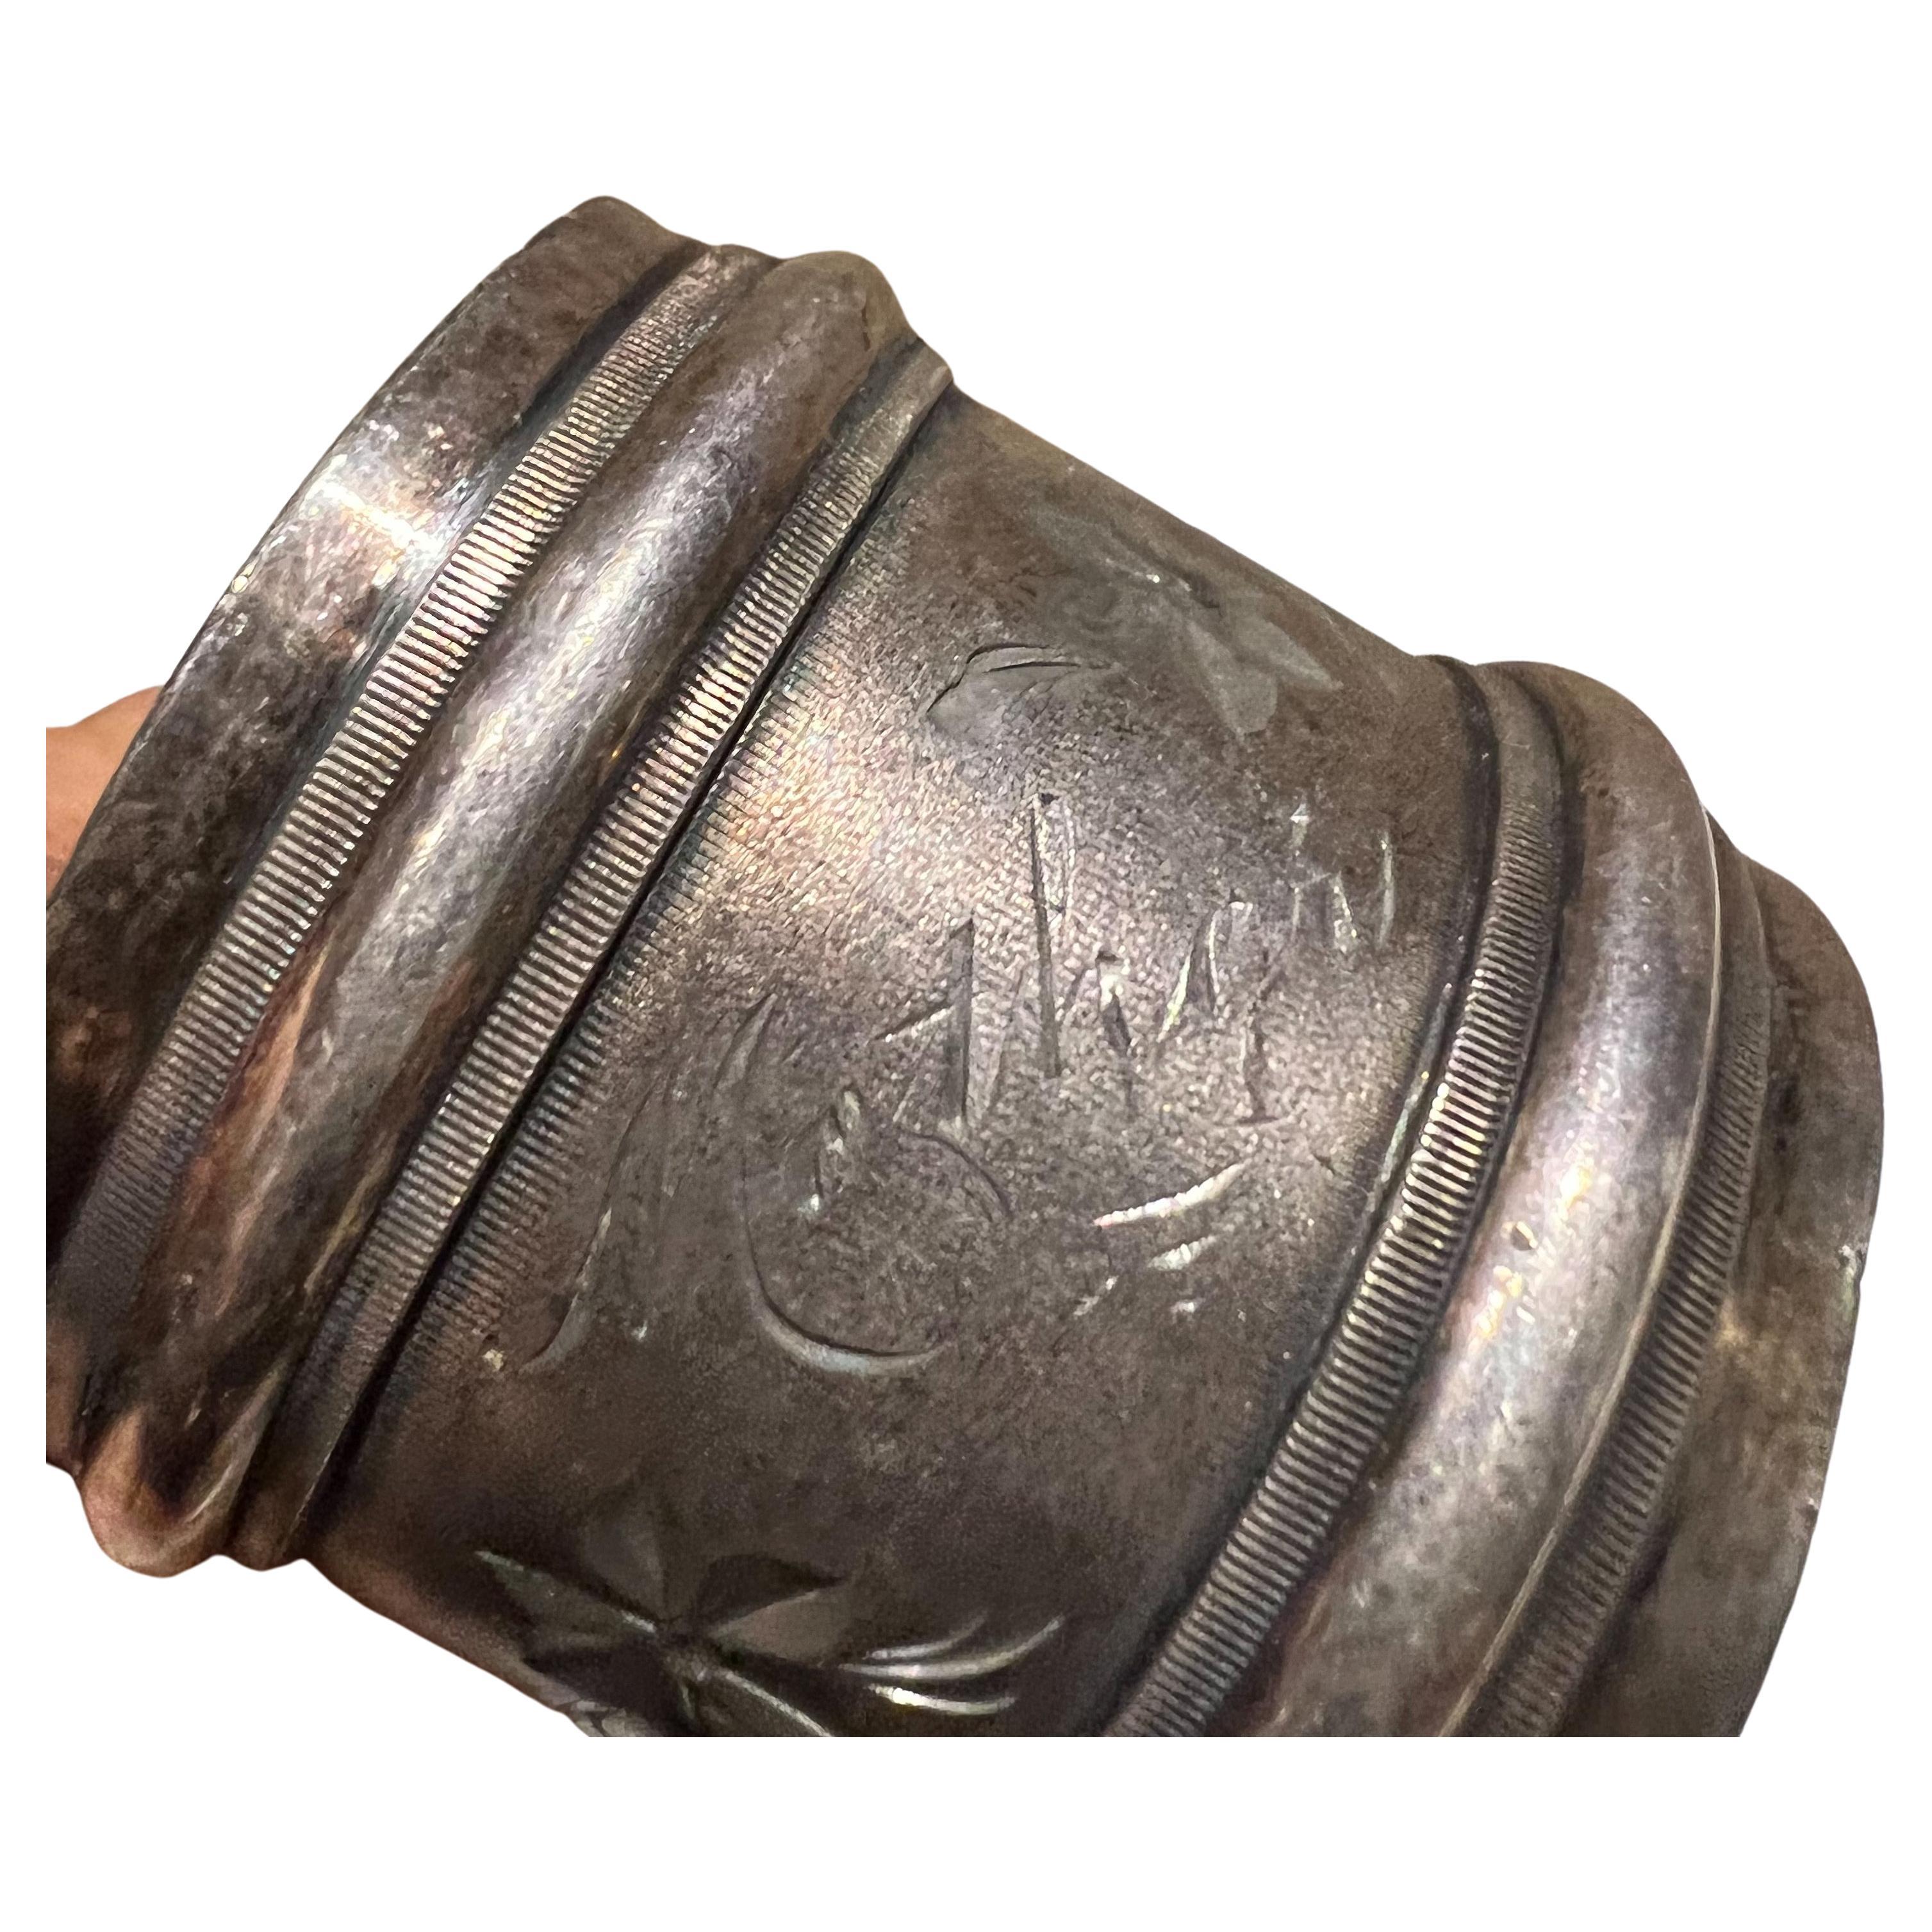 Antique vintage pretty silverplated Napkin ring holder inscribed Mother
Unmarked appears silverplated
MOTHER Inscription in the center. Lovely gay detail surround.
 Measures: 1.63 tall x 1.63
Preowned condition unrestored original vintage.
See